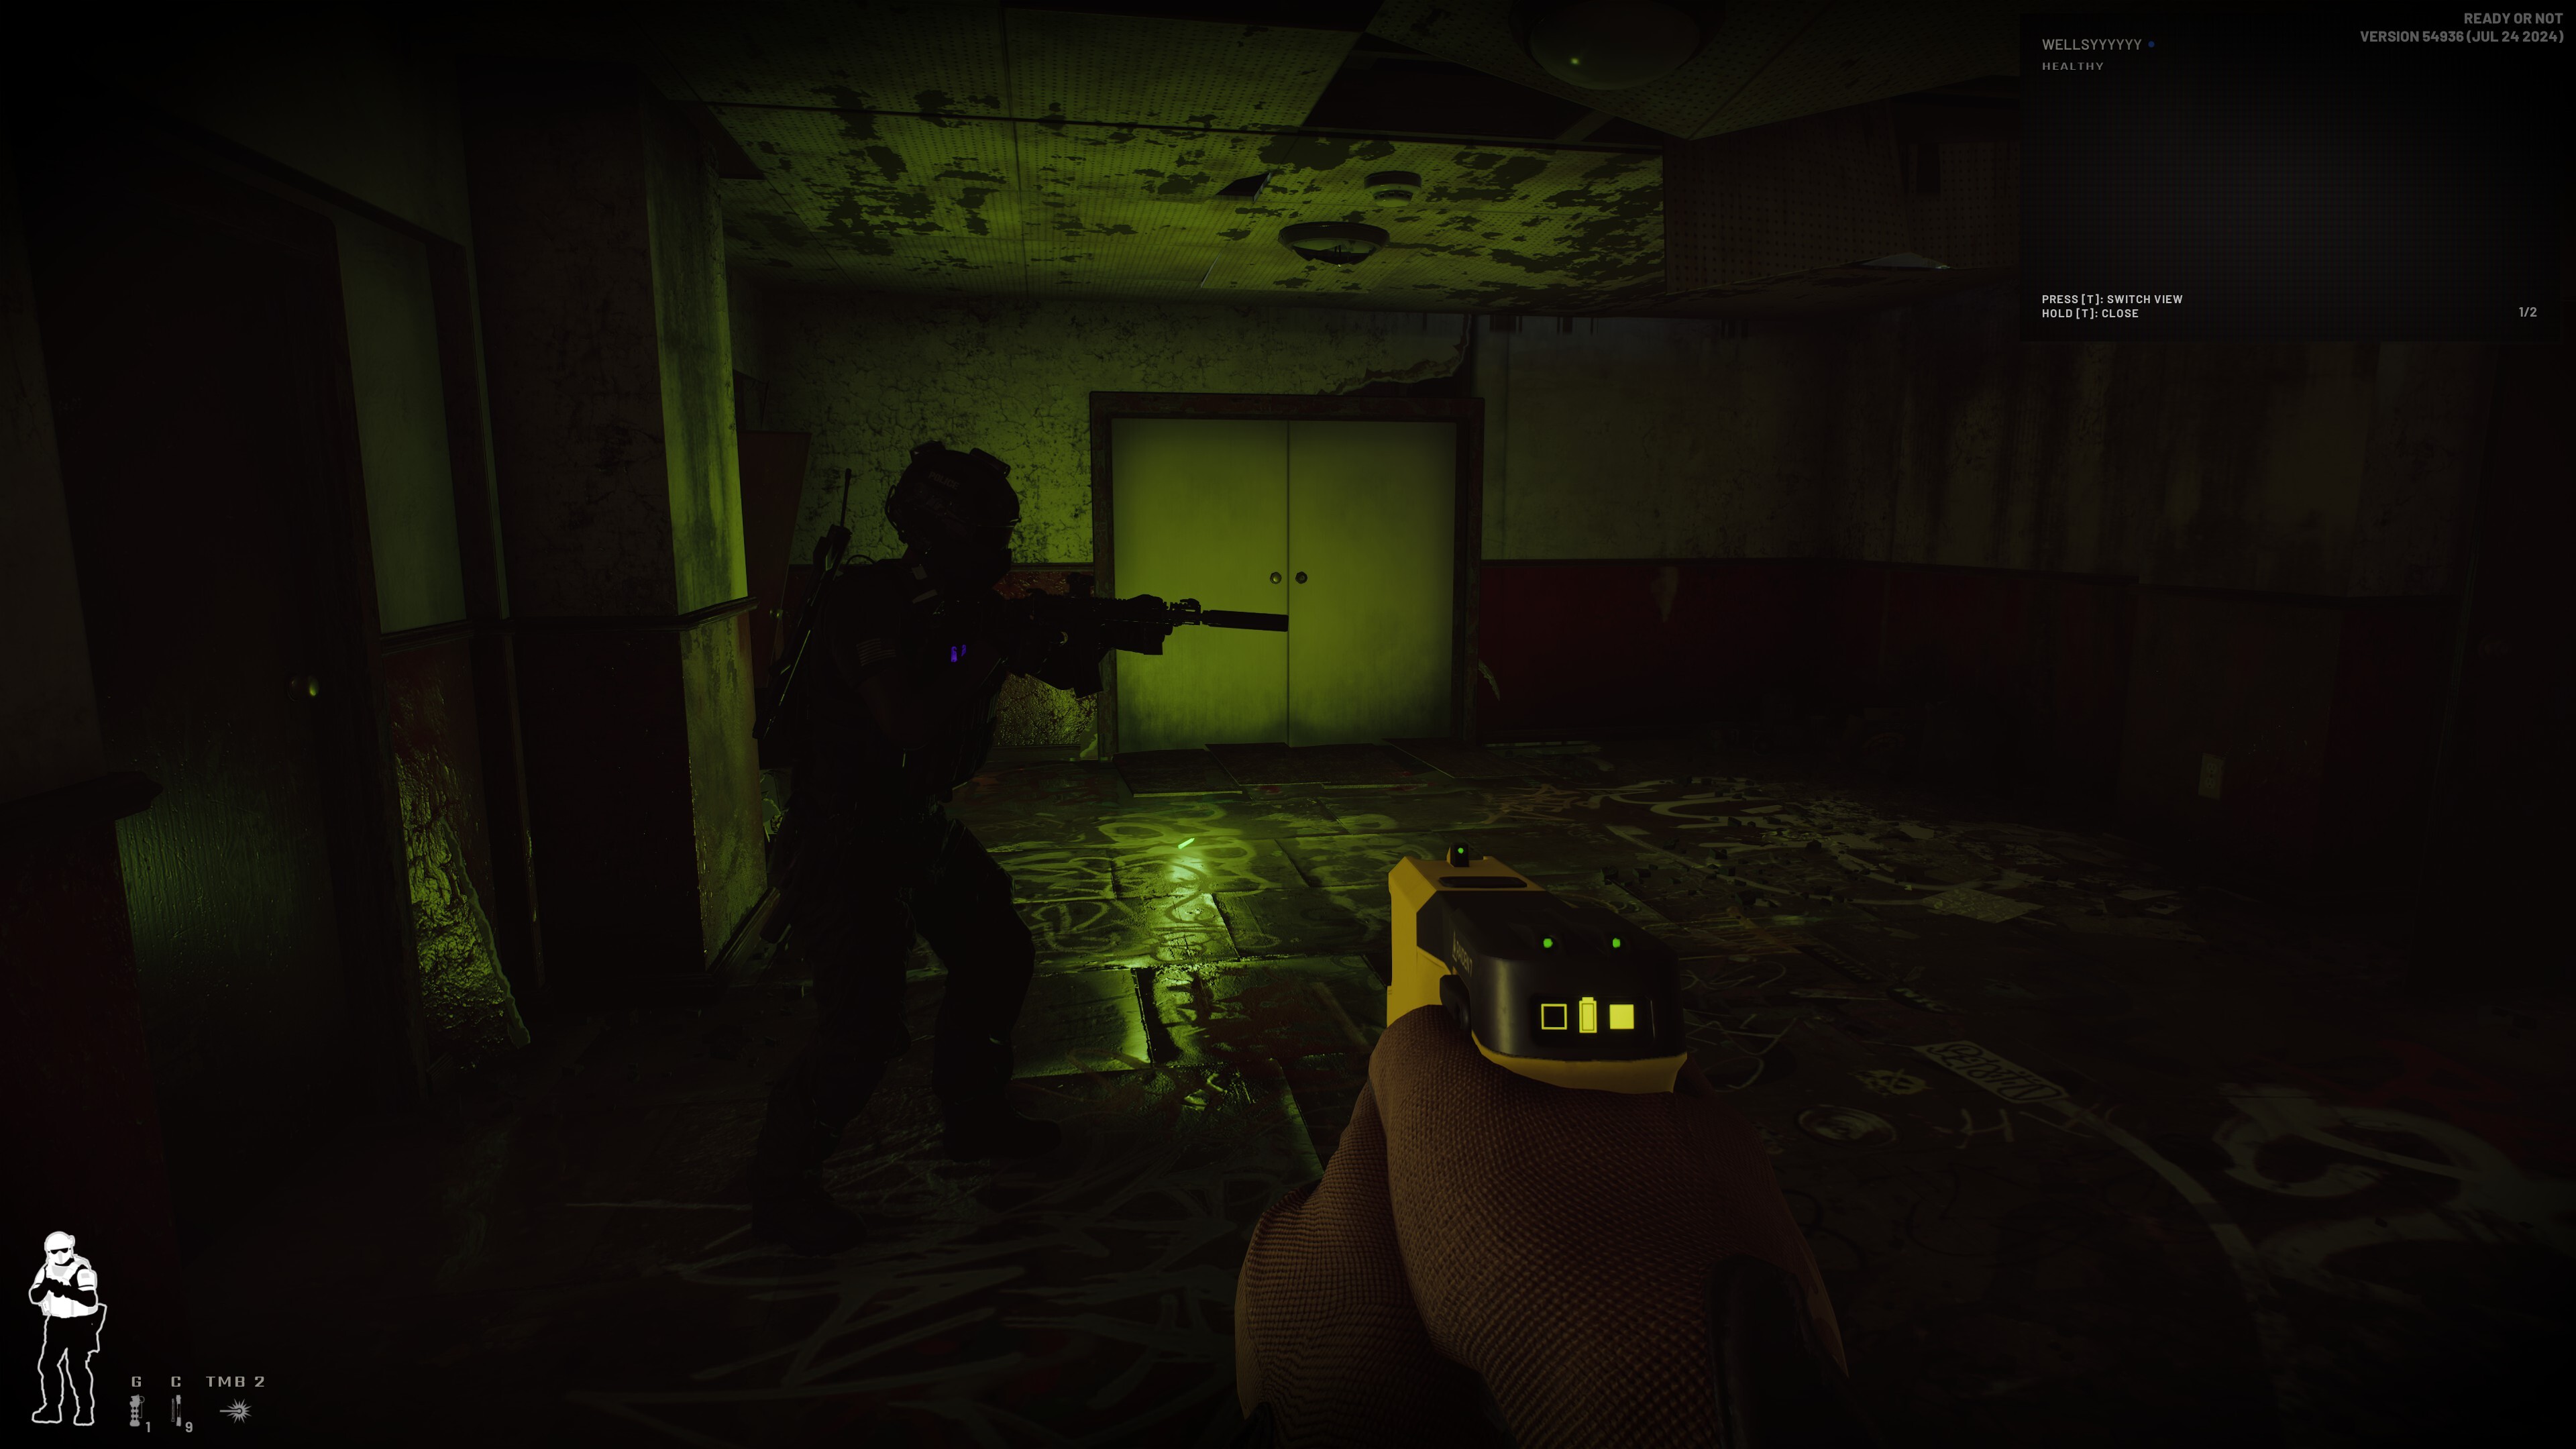 Figures with guns approach a doorway bathed in eerie green light.